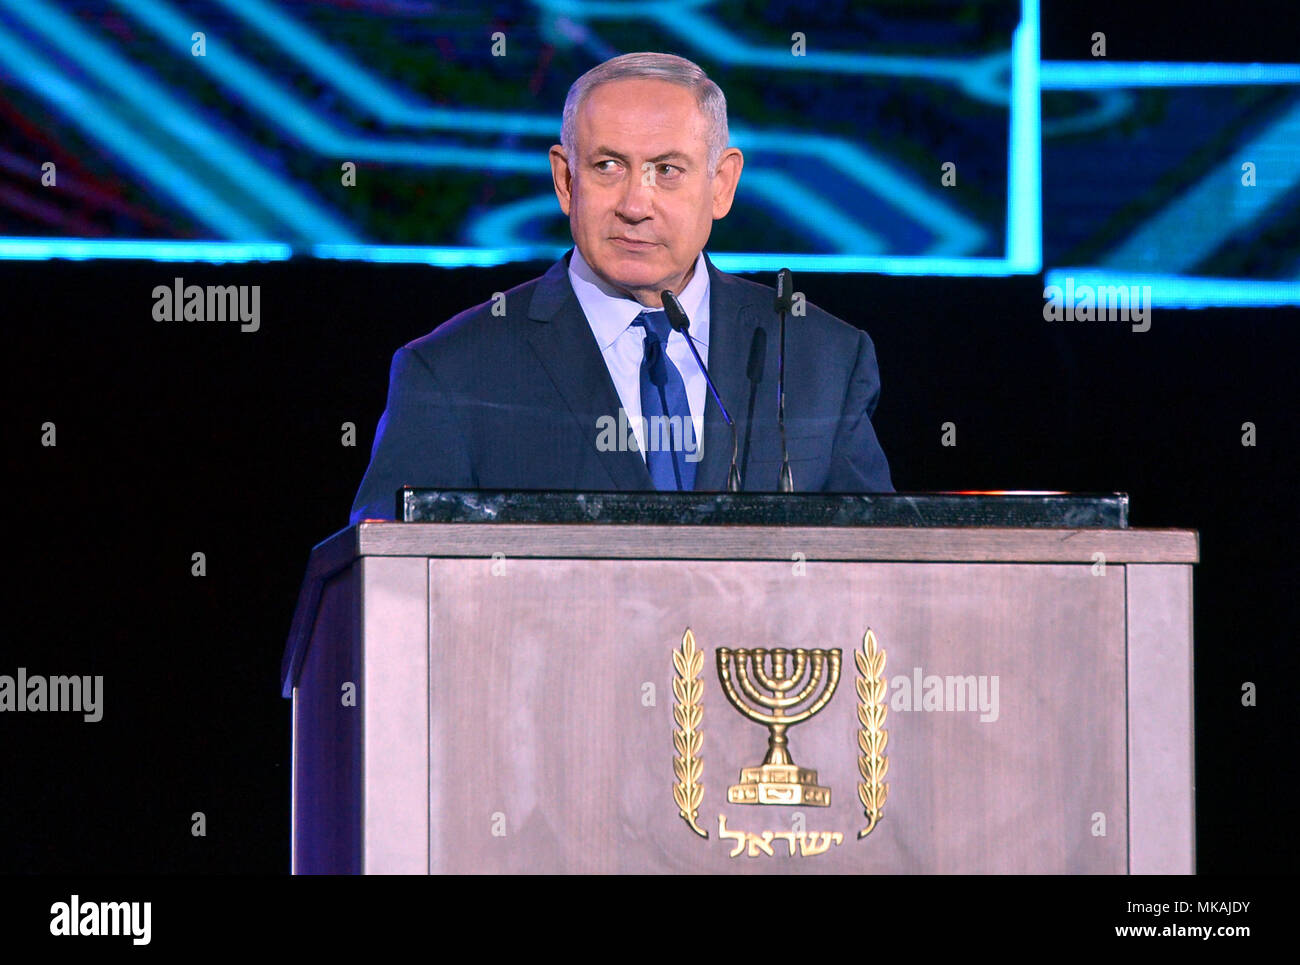 Latrun, Latrun. 7th May, 2018. Israeli Prime Minister Benjamin Netanyahu speaks during the ceremony marking the 70th anniversary of Israel Defense Forces (IDF), in Latrun, on May 7, 2018. Credit: Yossi Zeliger-JINI/Xinhua/Alamy Live News Stock Photo